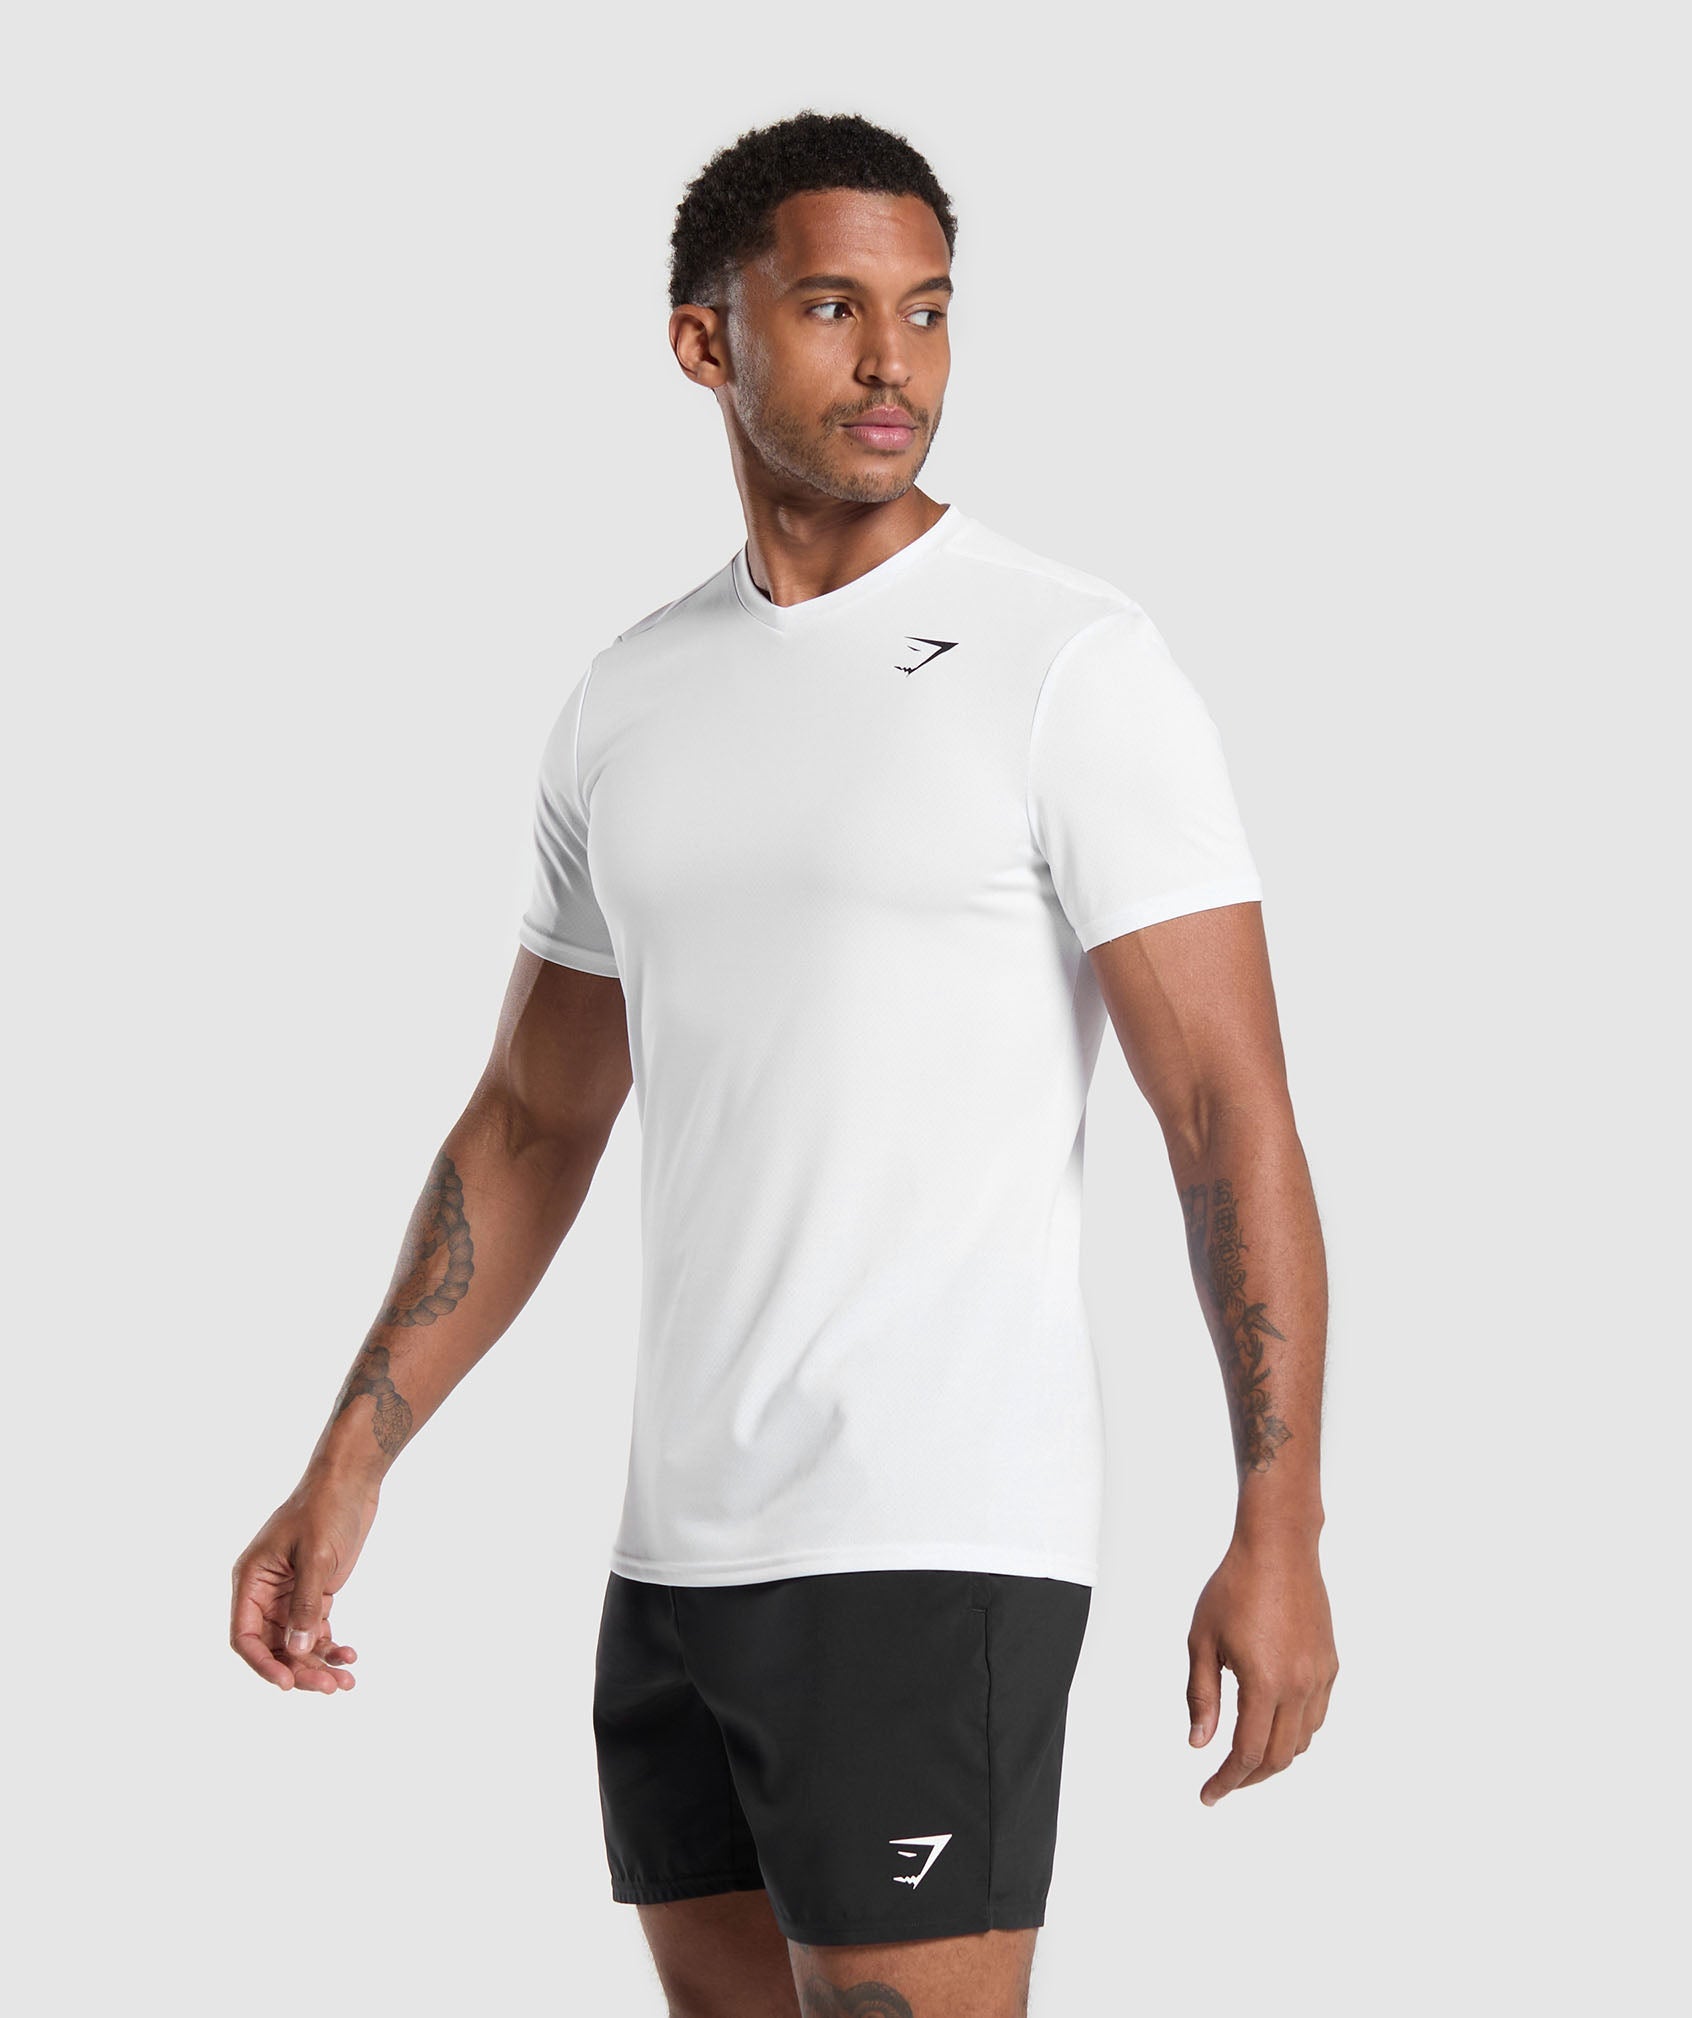 Arrival V-Neck T Shirt in White - view 3